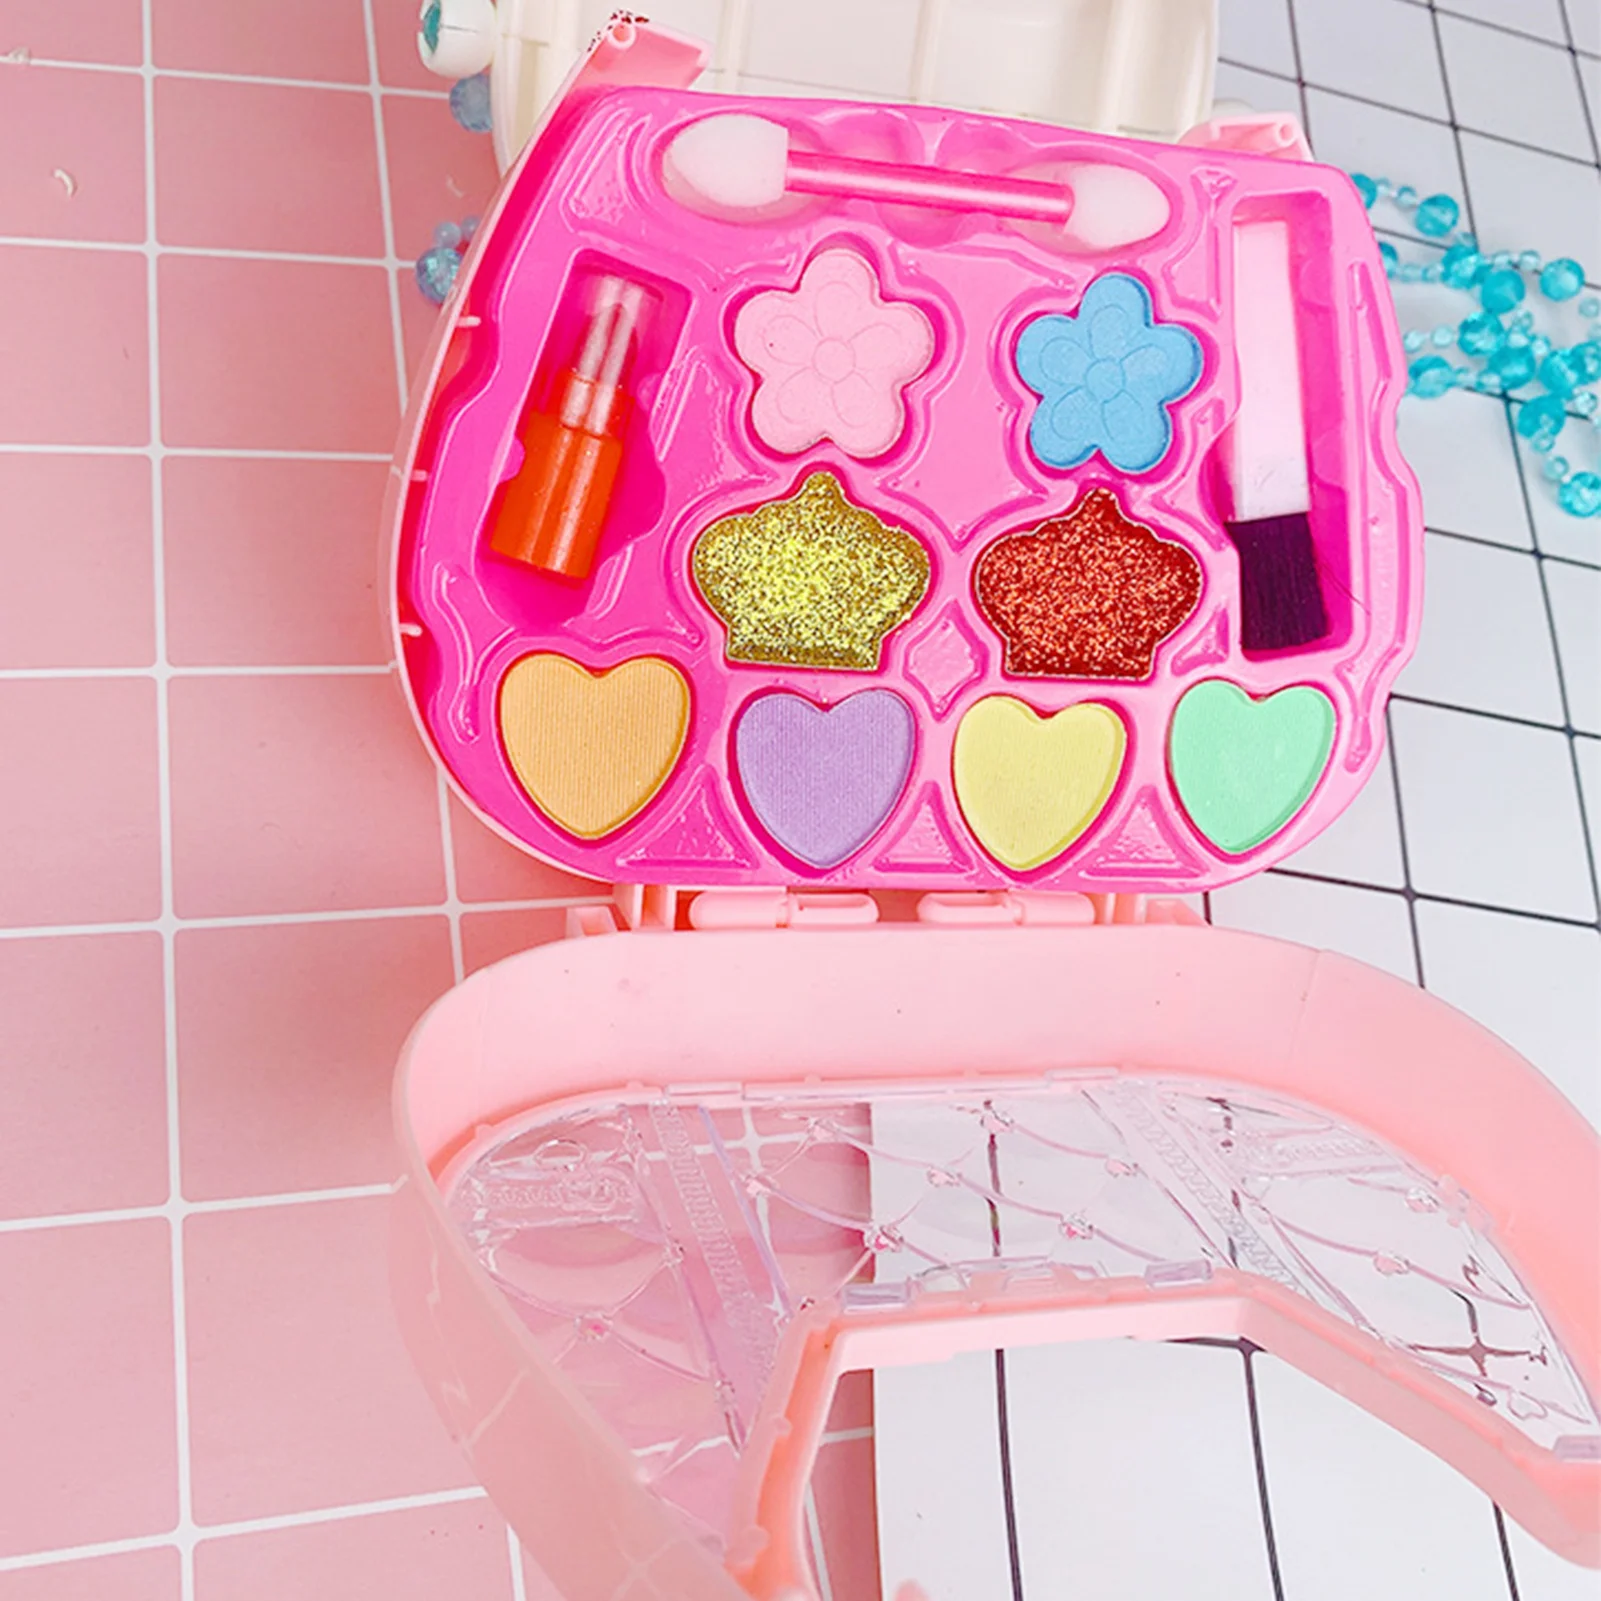 Baby Girls Make Up Set Toys Pretend Play Cosmetic Bag Beauty Hair Salon Toy Makeup Tools Kit Children Pretend Play Toys